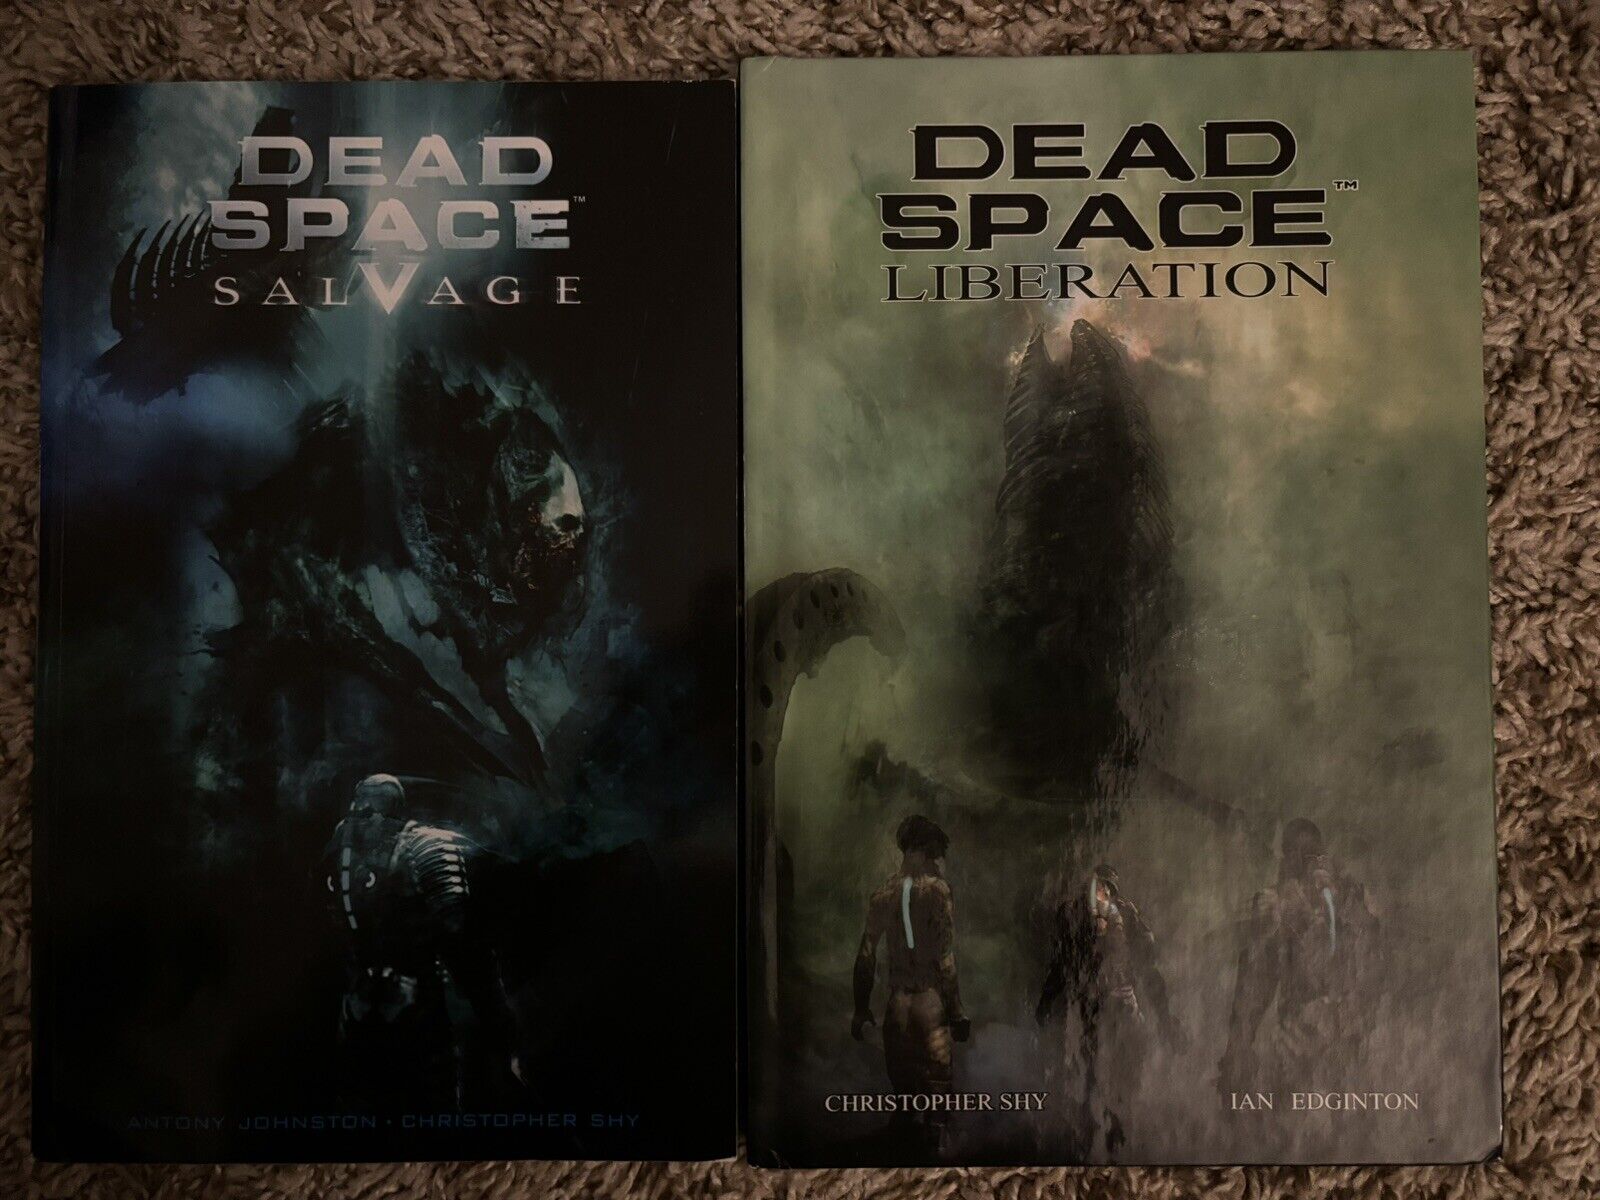 Dead Space Salvage TPB & Dead Space Liberation Hardcover - See Description